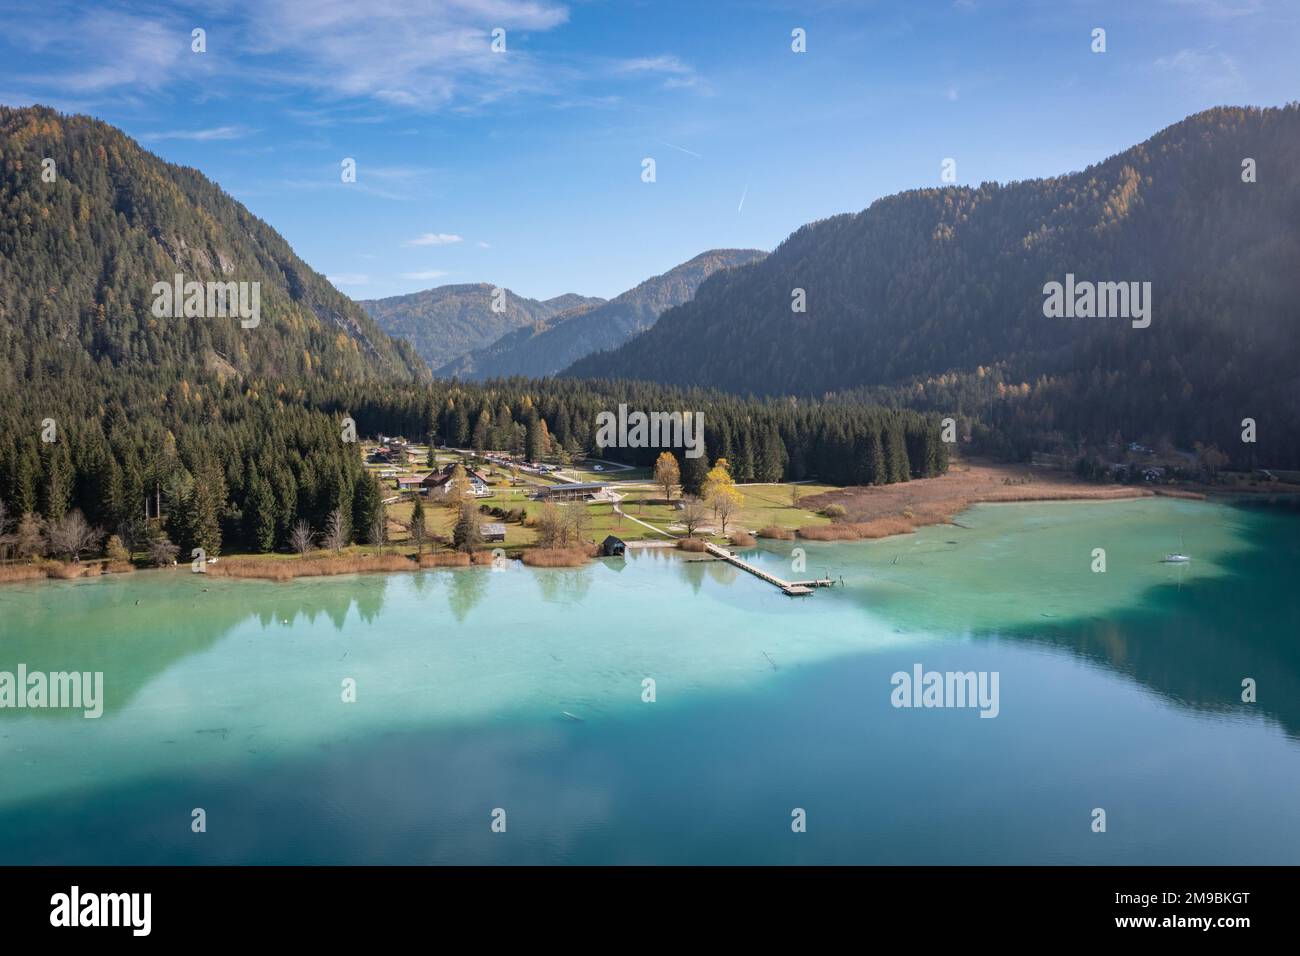 Lake Weißensee in Carinthia. Panorama aerial view of the East side of the idyllic lake during autumn. Stock Photo